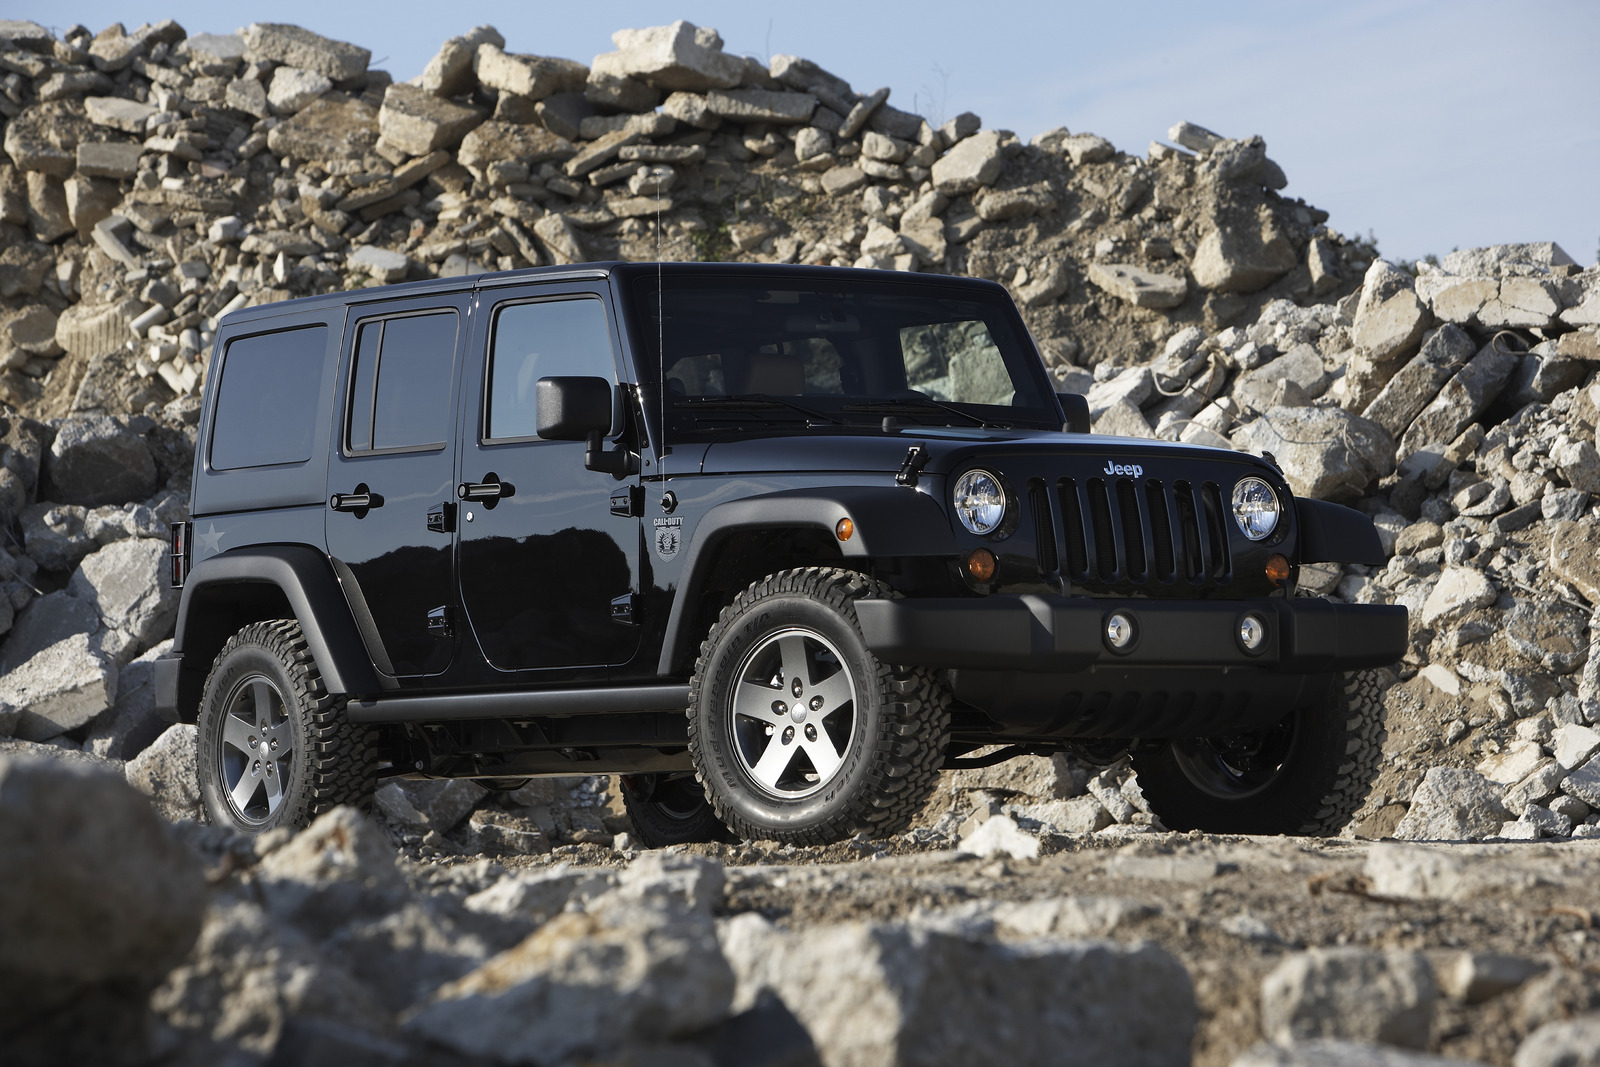 2011 Jeep Wrangler Joins Forces With Call Of Duty: Black Ops